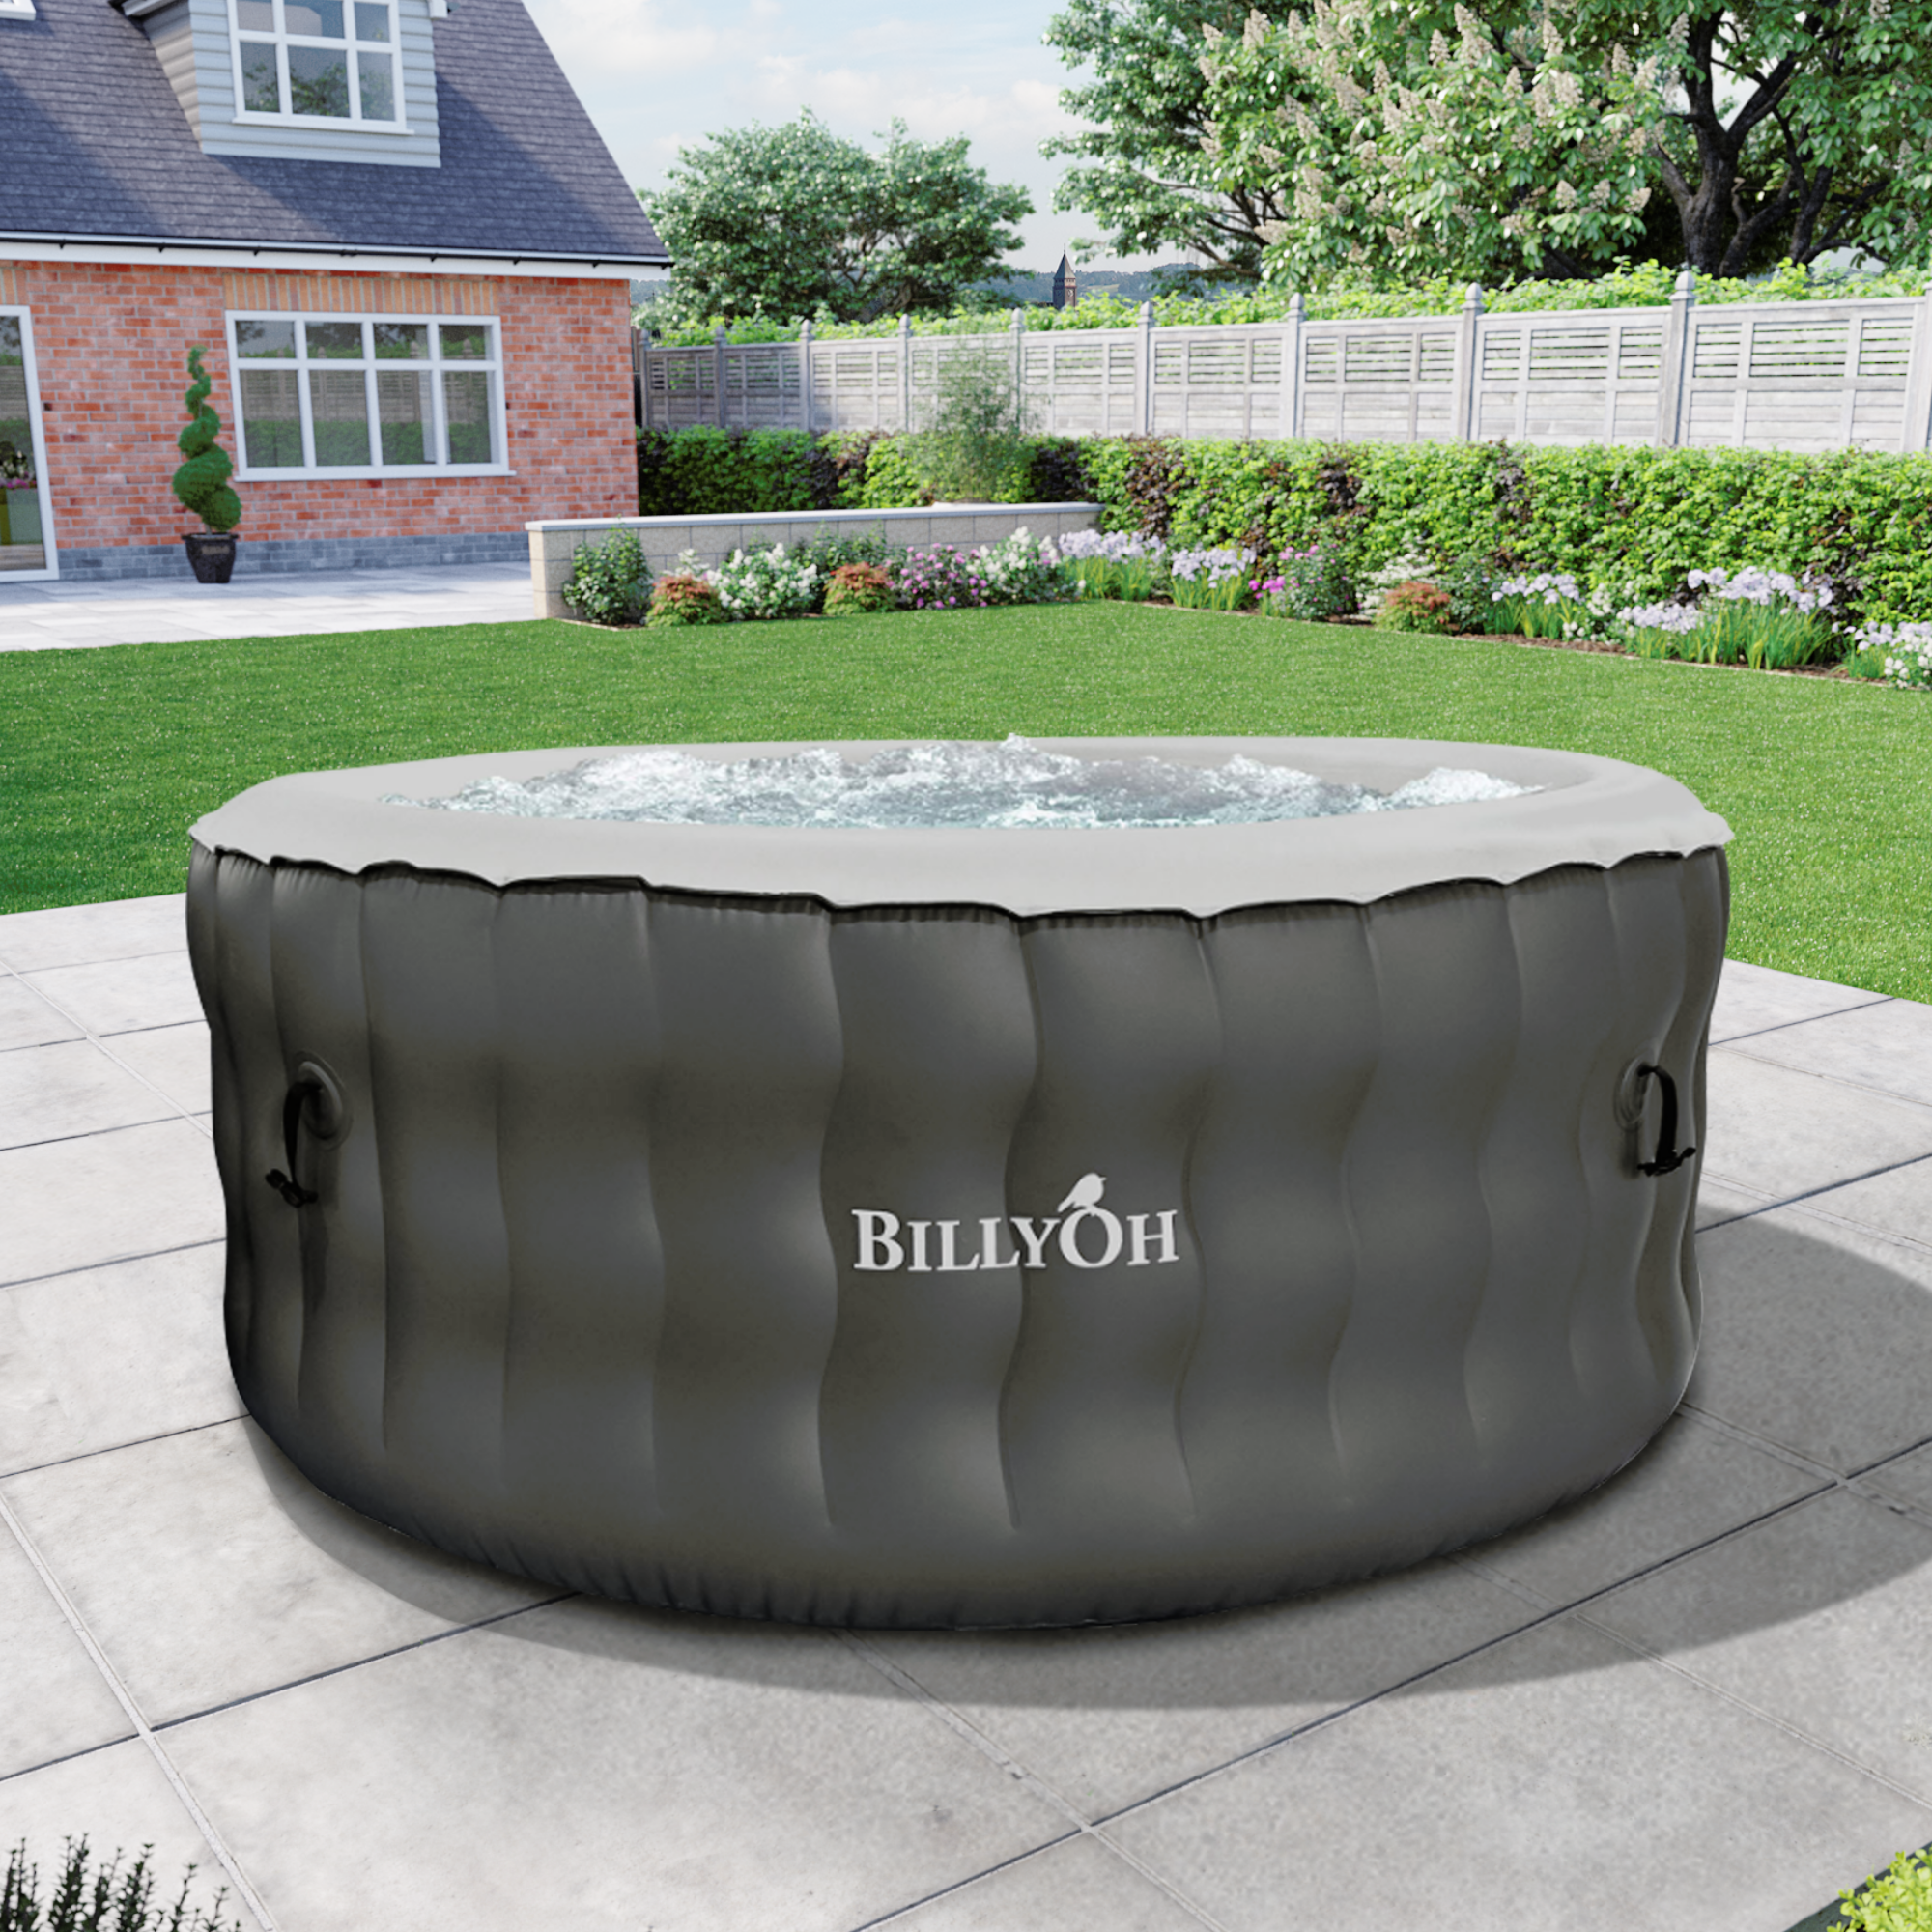 Billyoh Respiro Inflatable Hot Tub With Jets 4 6 People 4 6 People